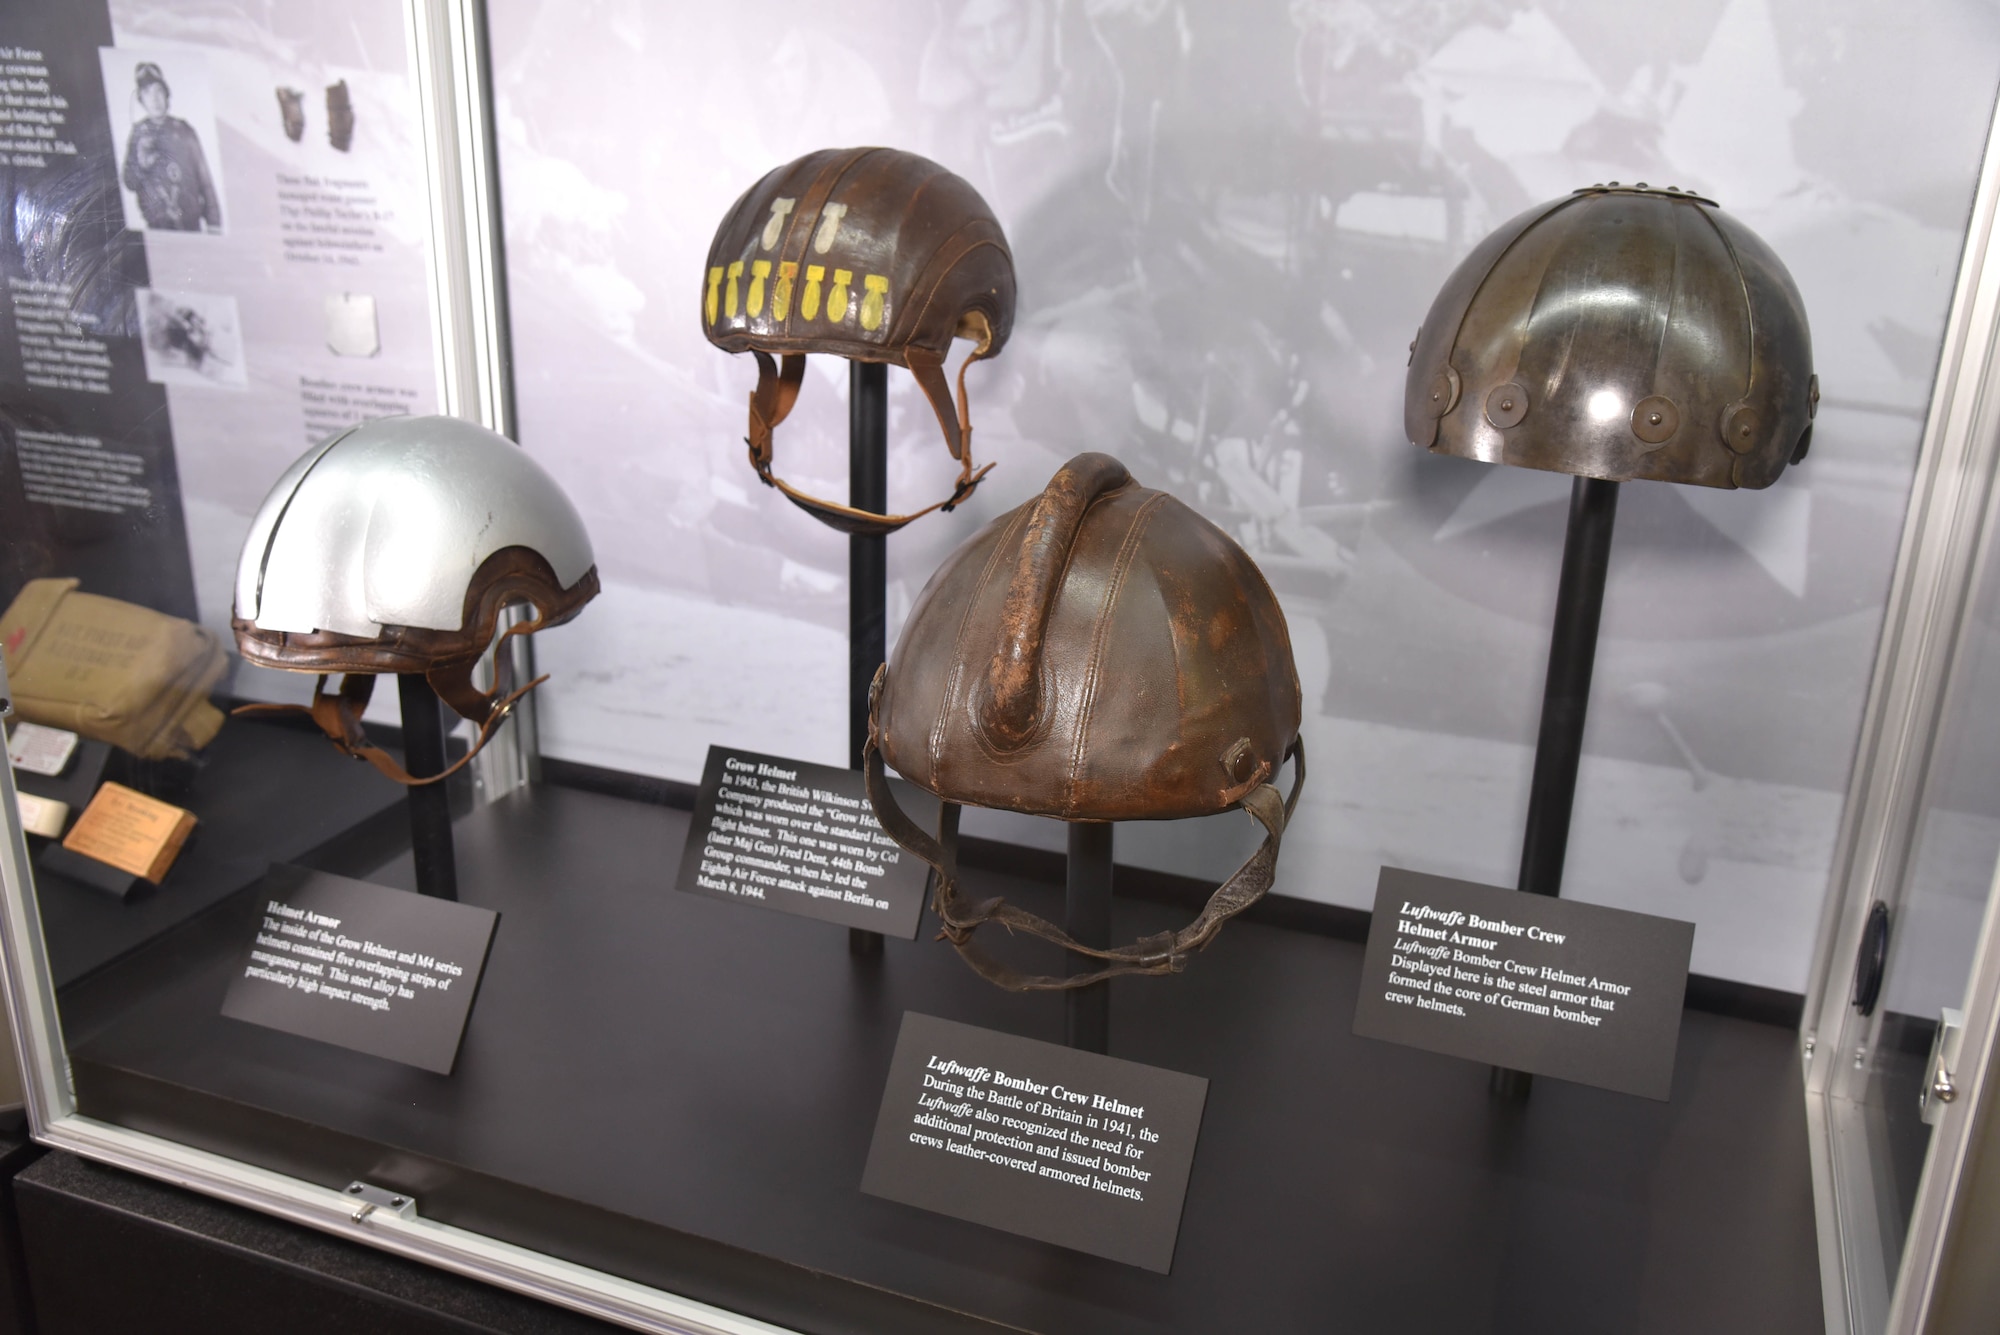 WWII bomber crew helmets on display in the WWII Gallery at the National Museum of the USAF. (U.S.Air Force photo)